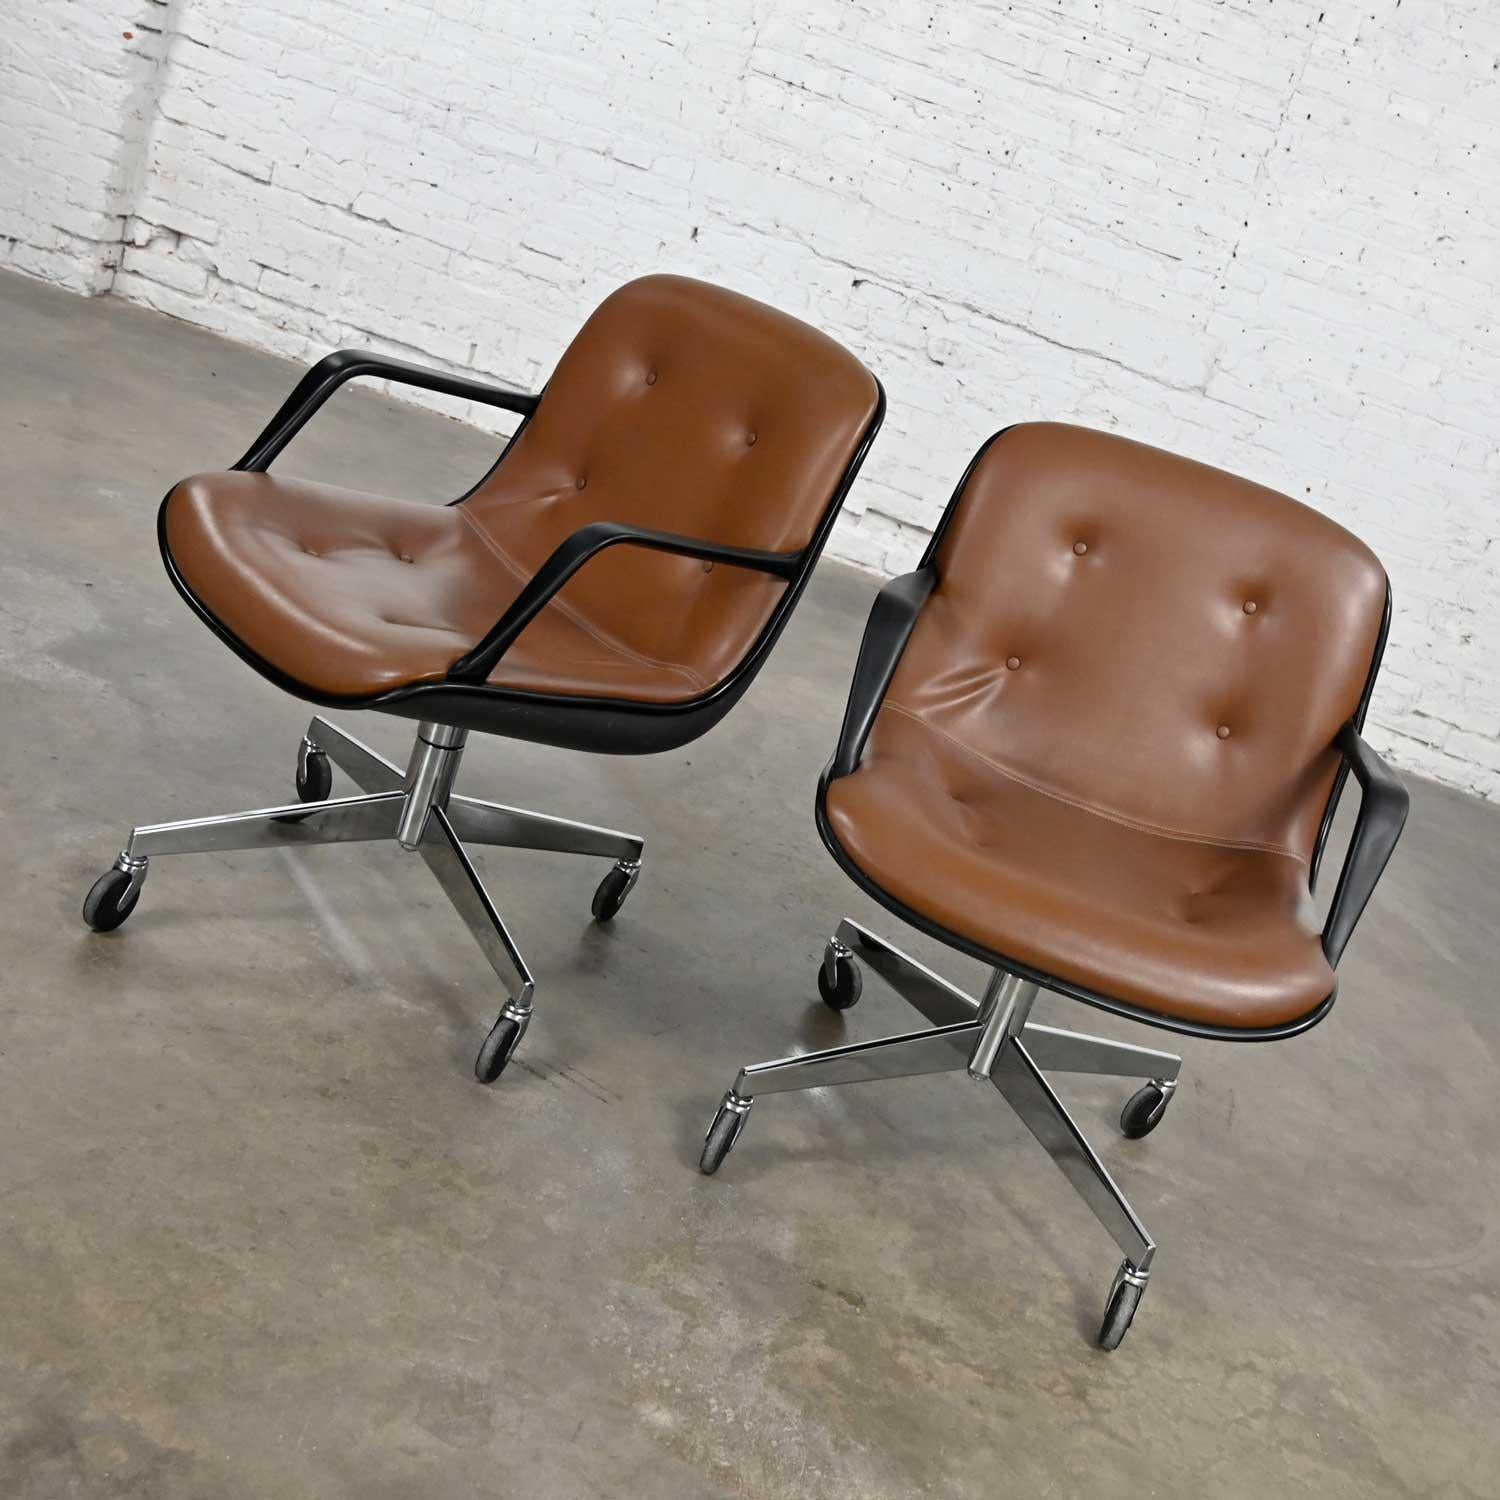 Handsome pair of brown vinyl faux leather MCM (a.k.a.) Mid-Century Modern style Steelcase 451 office chairs with 4 prong base on casters in the style of the Charles Pollock office chair for Knoll with height adjustment, swivel, and rolling features.